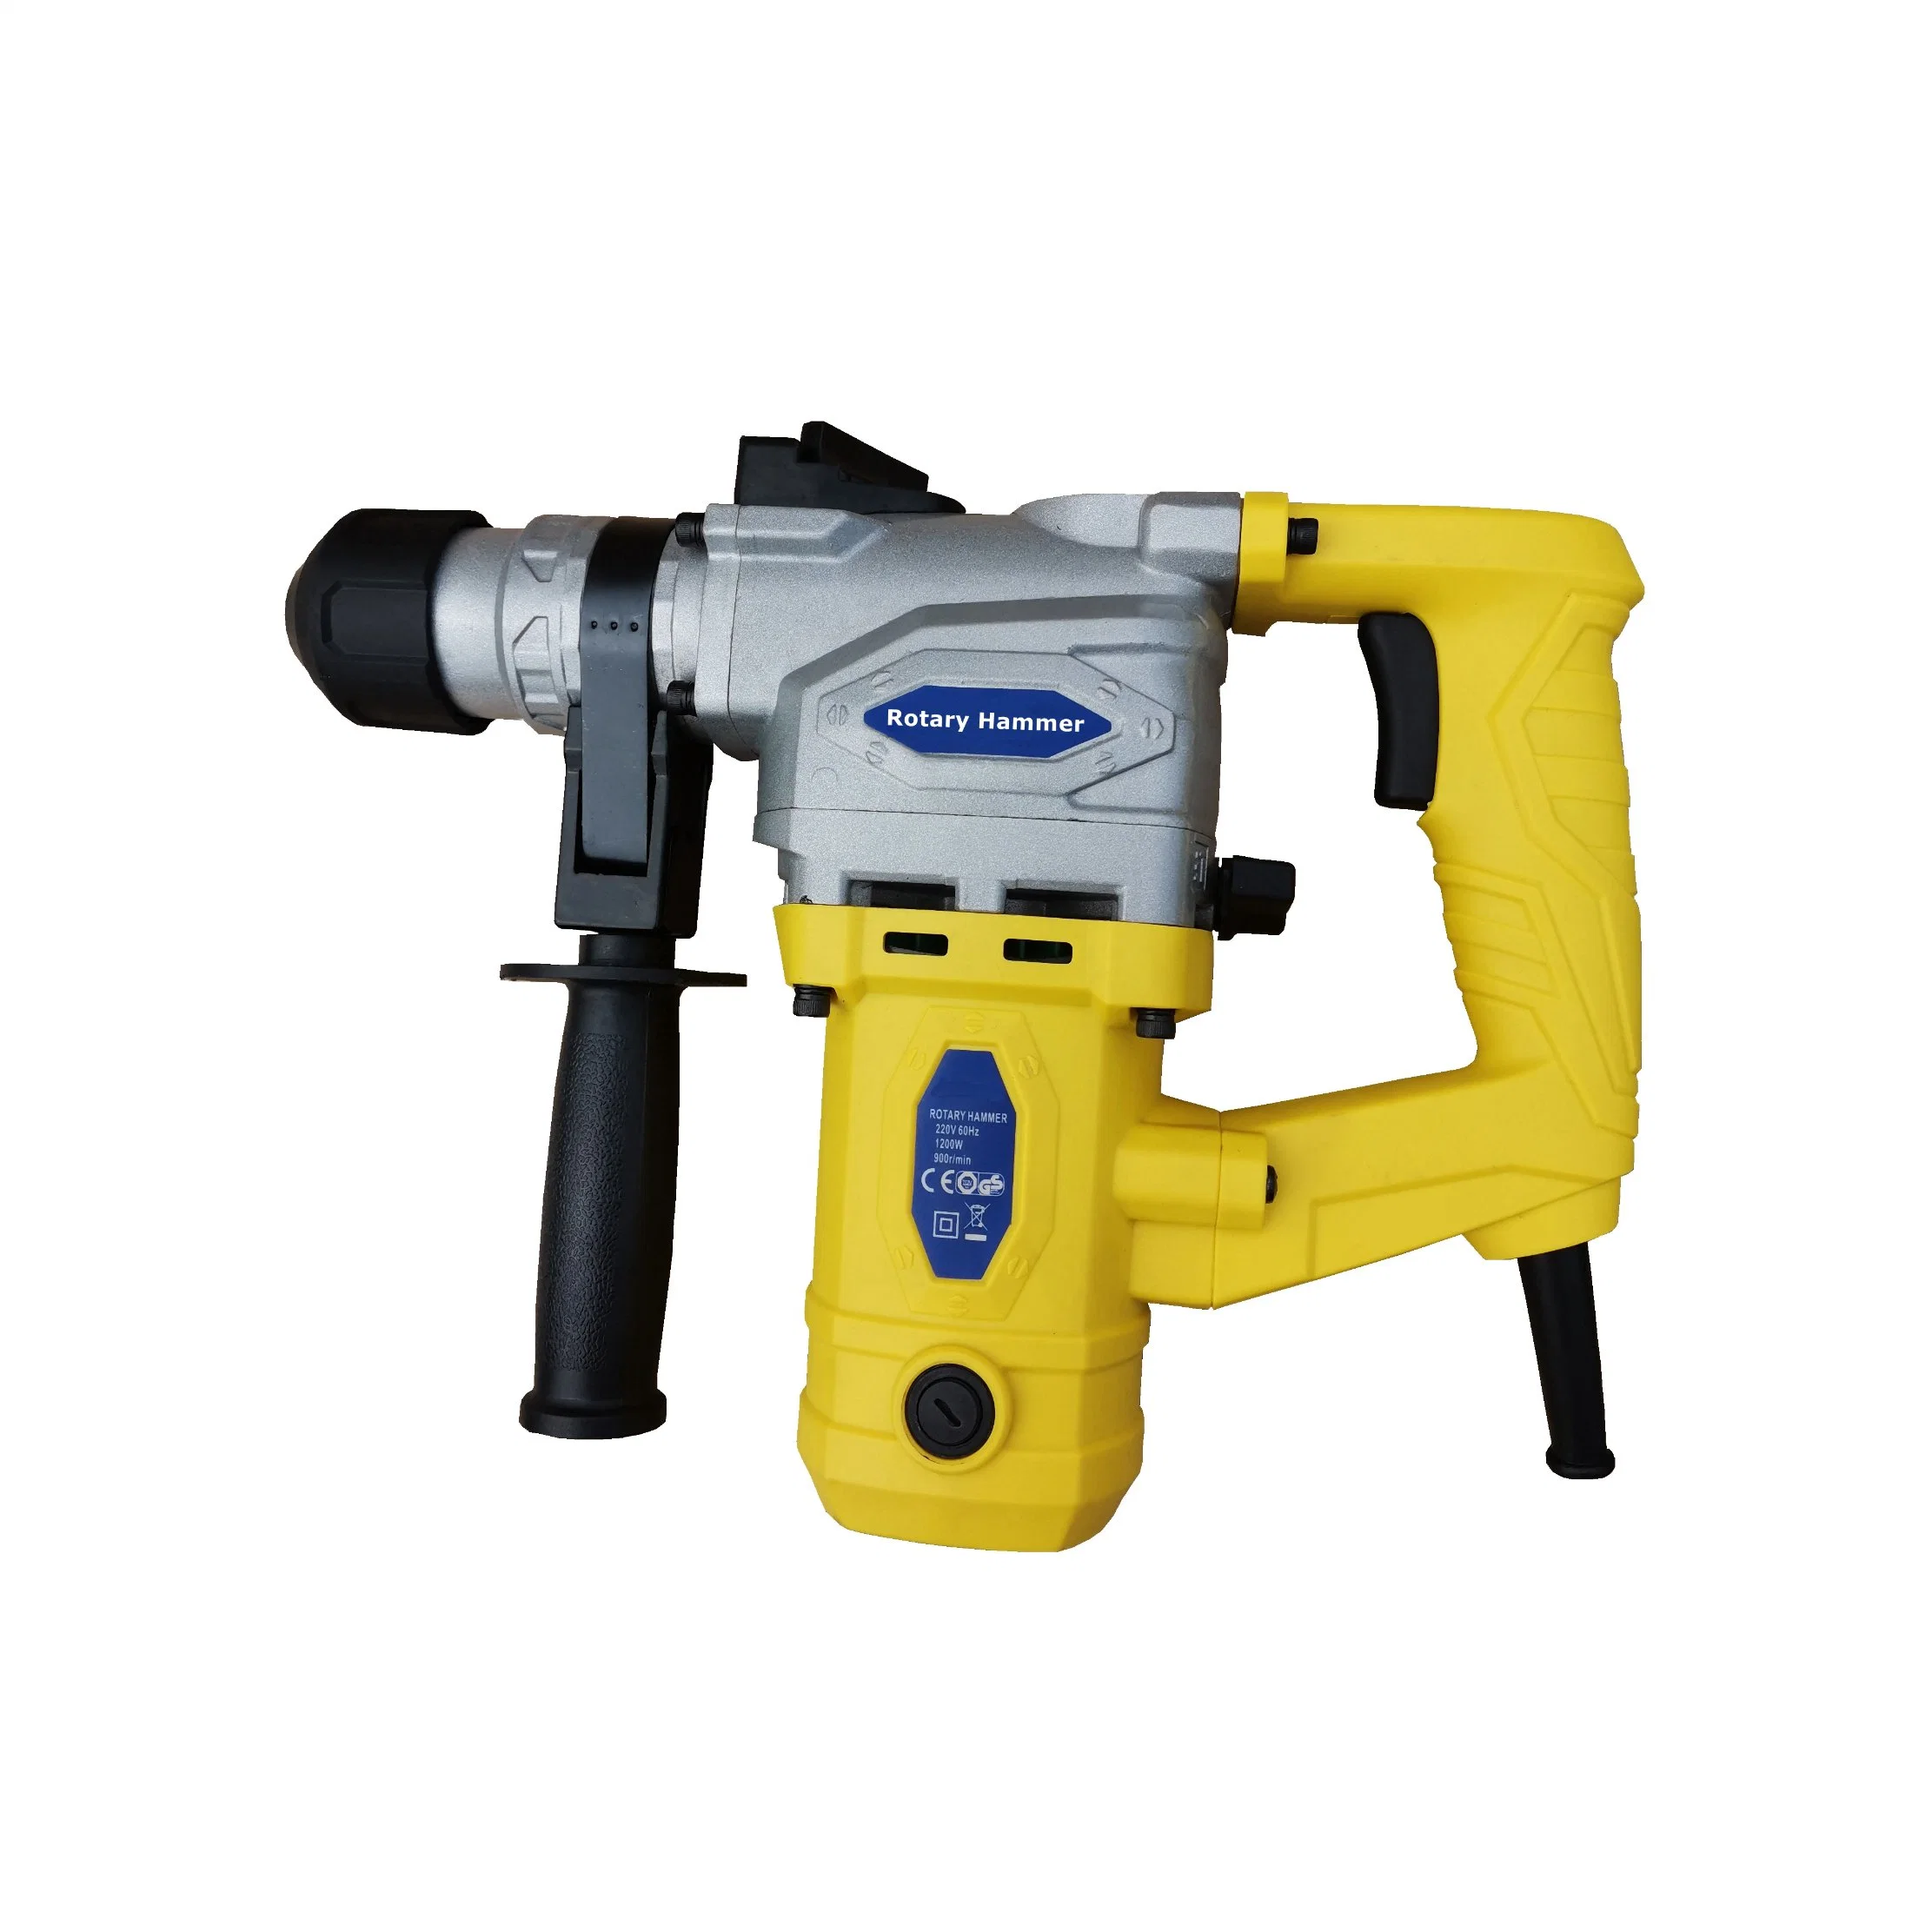 China Factory Produced Quality Electric Drill Hammer 850W